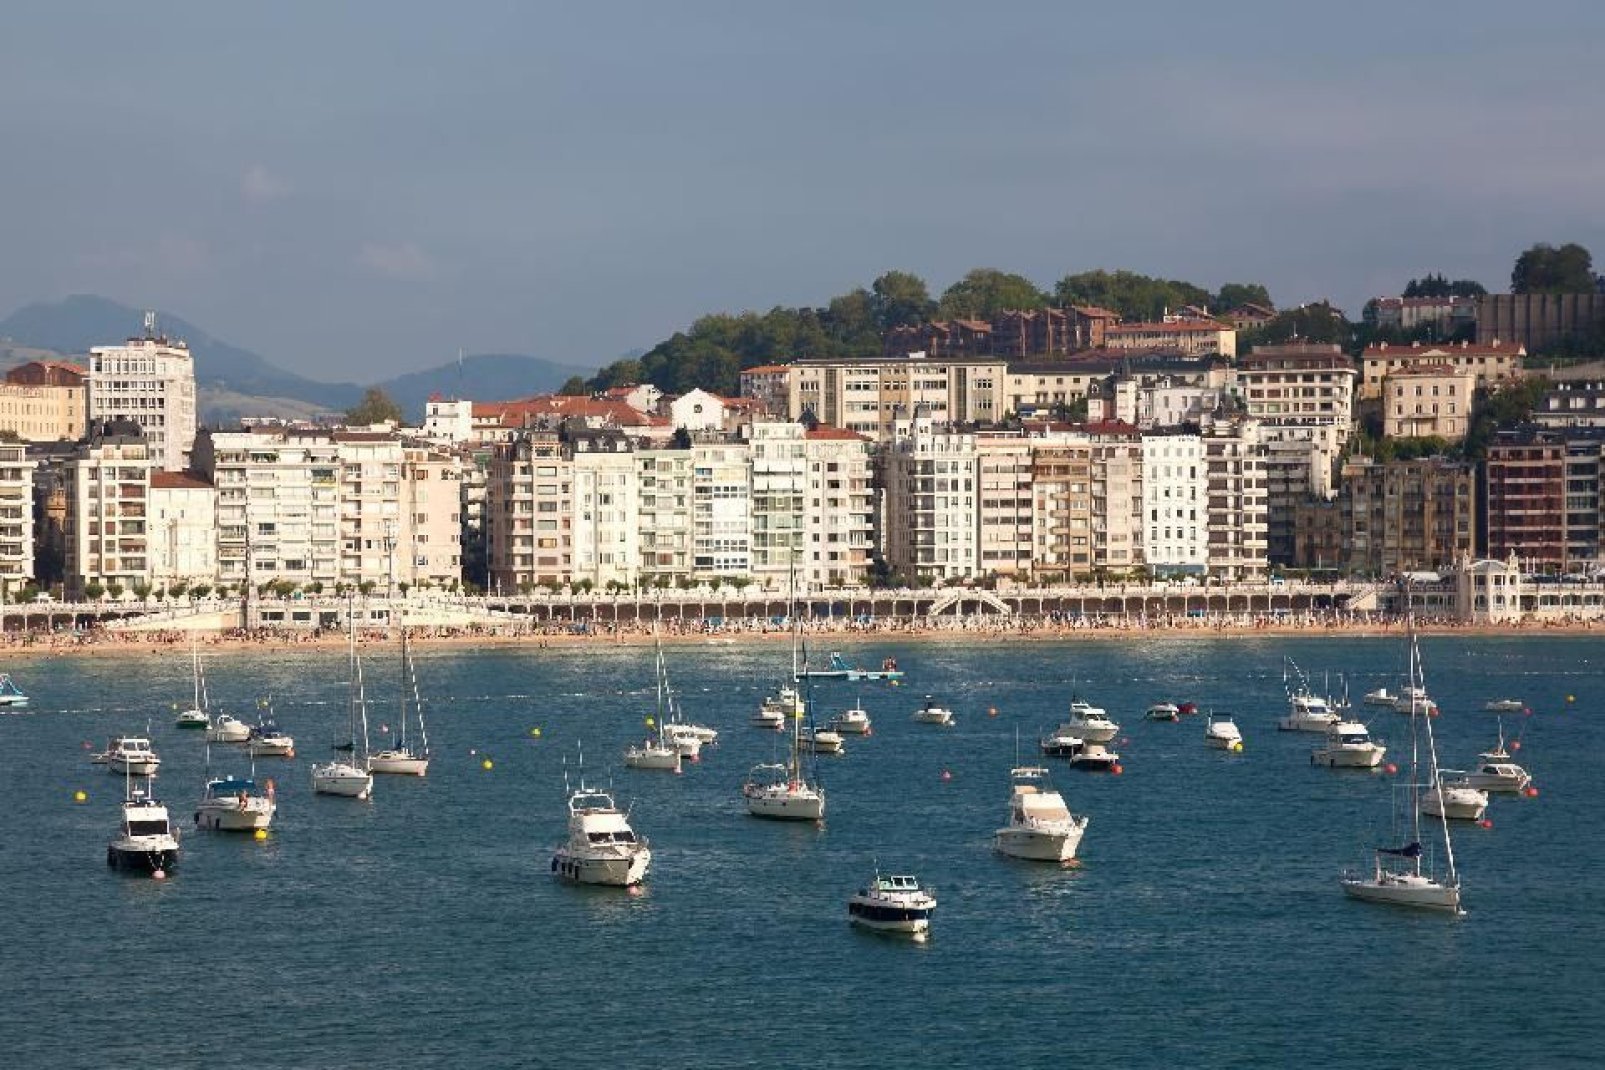 San Sebastian has been one of the most touristic cities in Spain since the Belle Époque.